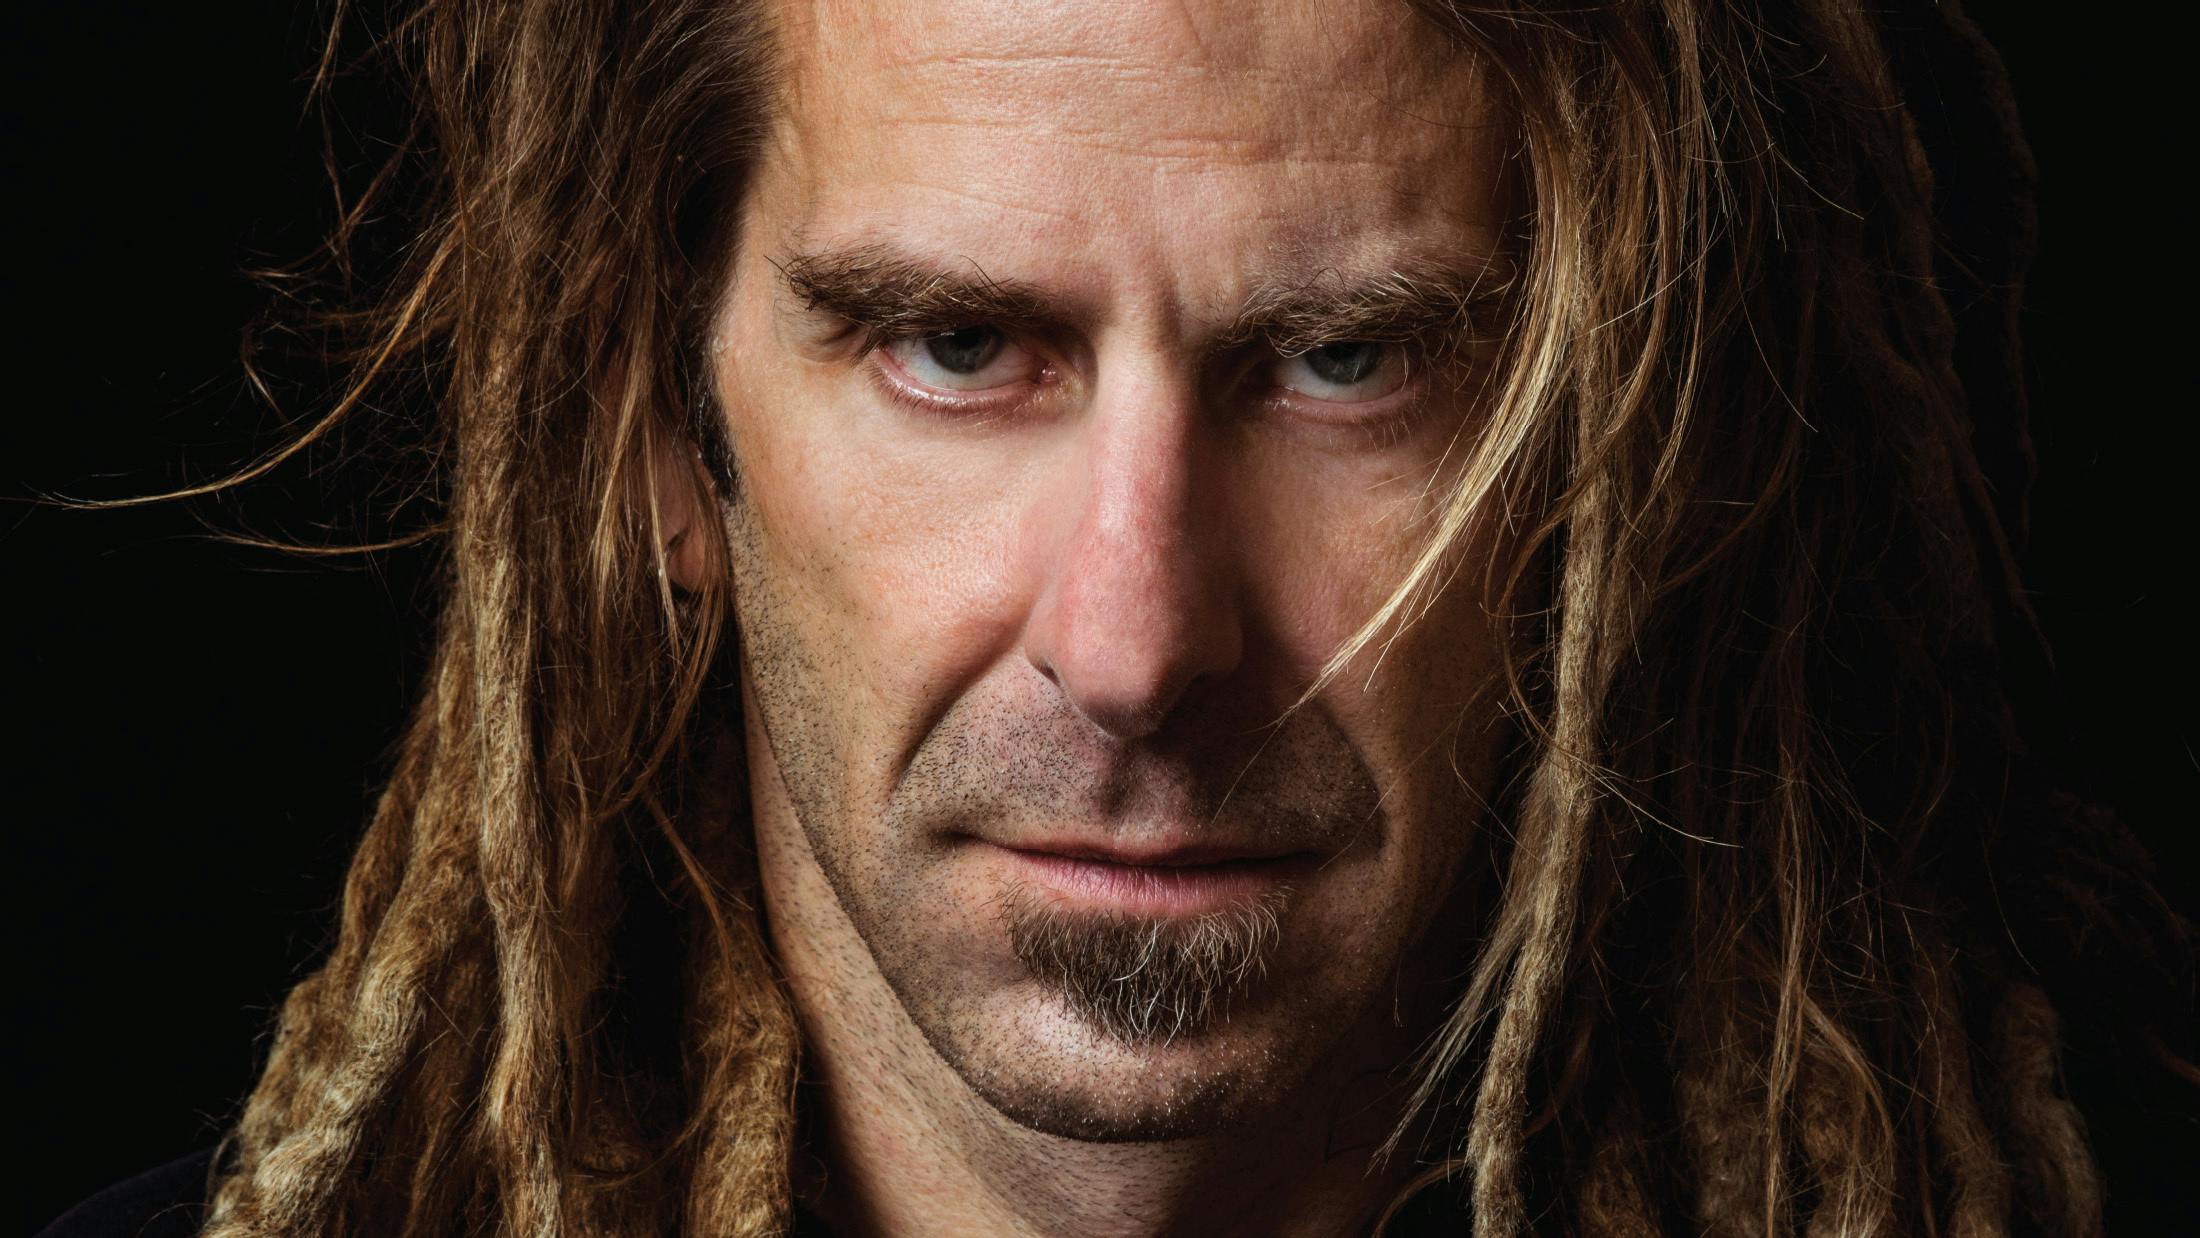 Randy Blythe: "If You’re Sitting Behind A Computer Screen And Judging People, That Goes Against Everything This Music Stands For"